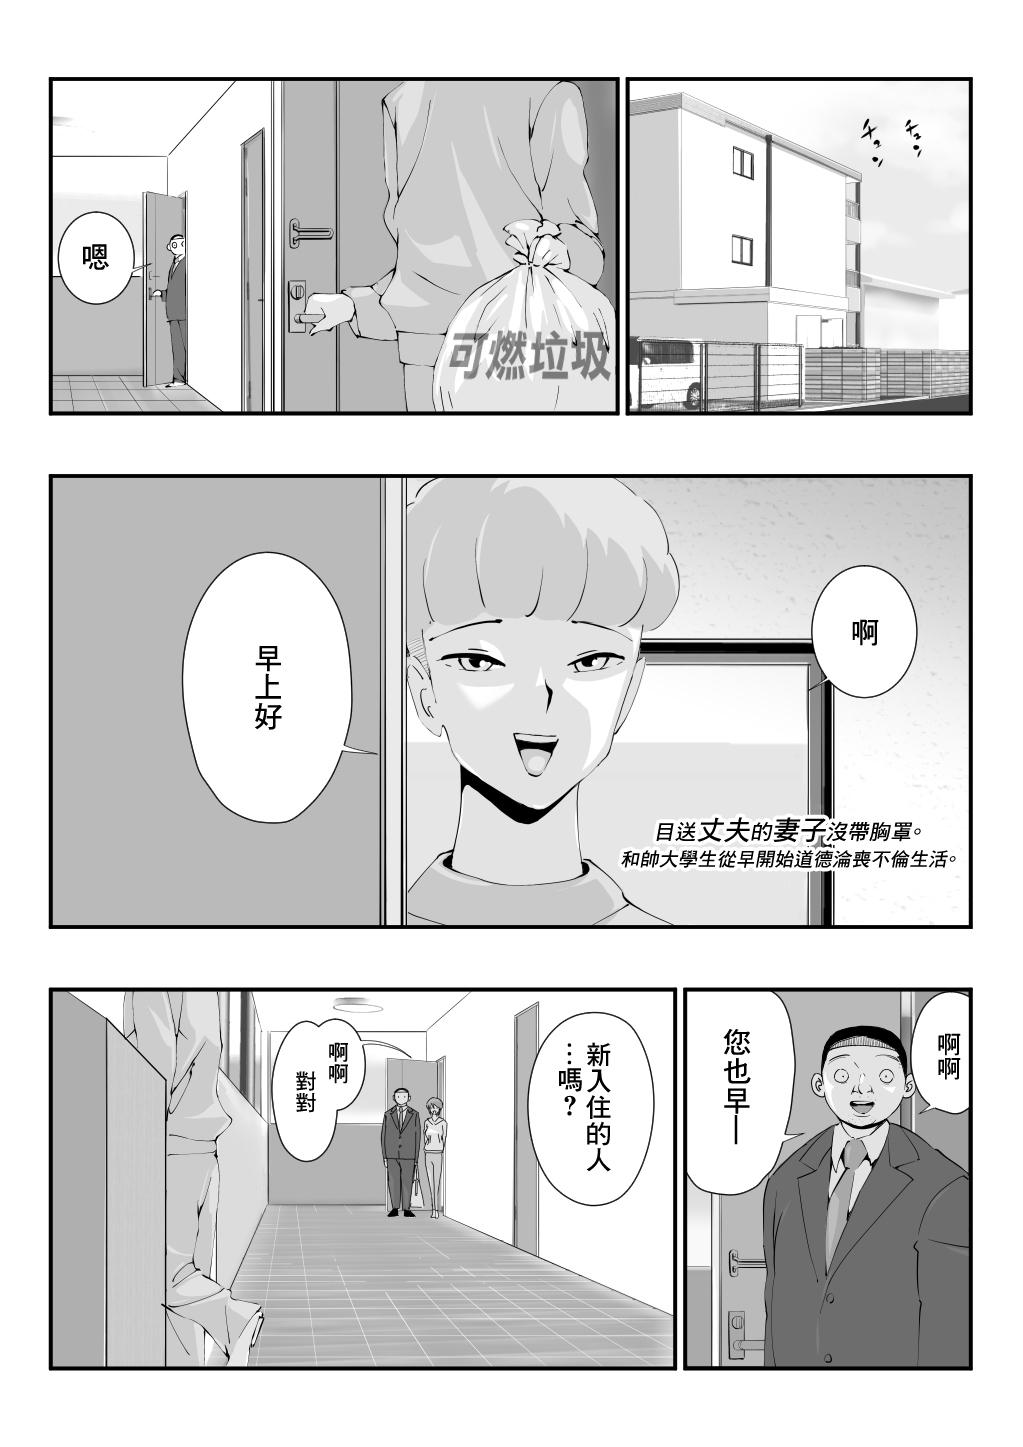 Gay Hairy 夫を見送る妻はノーブラ。イケメン大学生とのイケナイ朝活不倫。 Blow Job Contest - Page 3